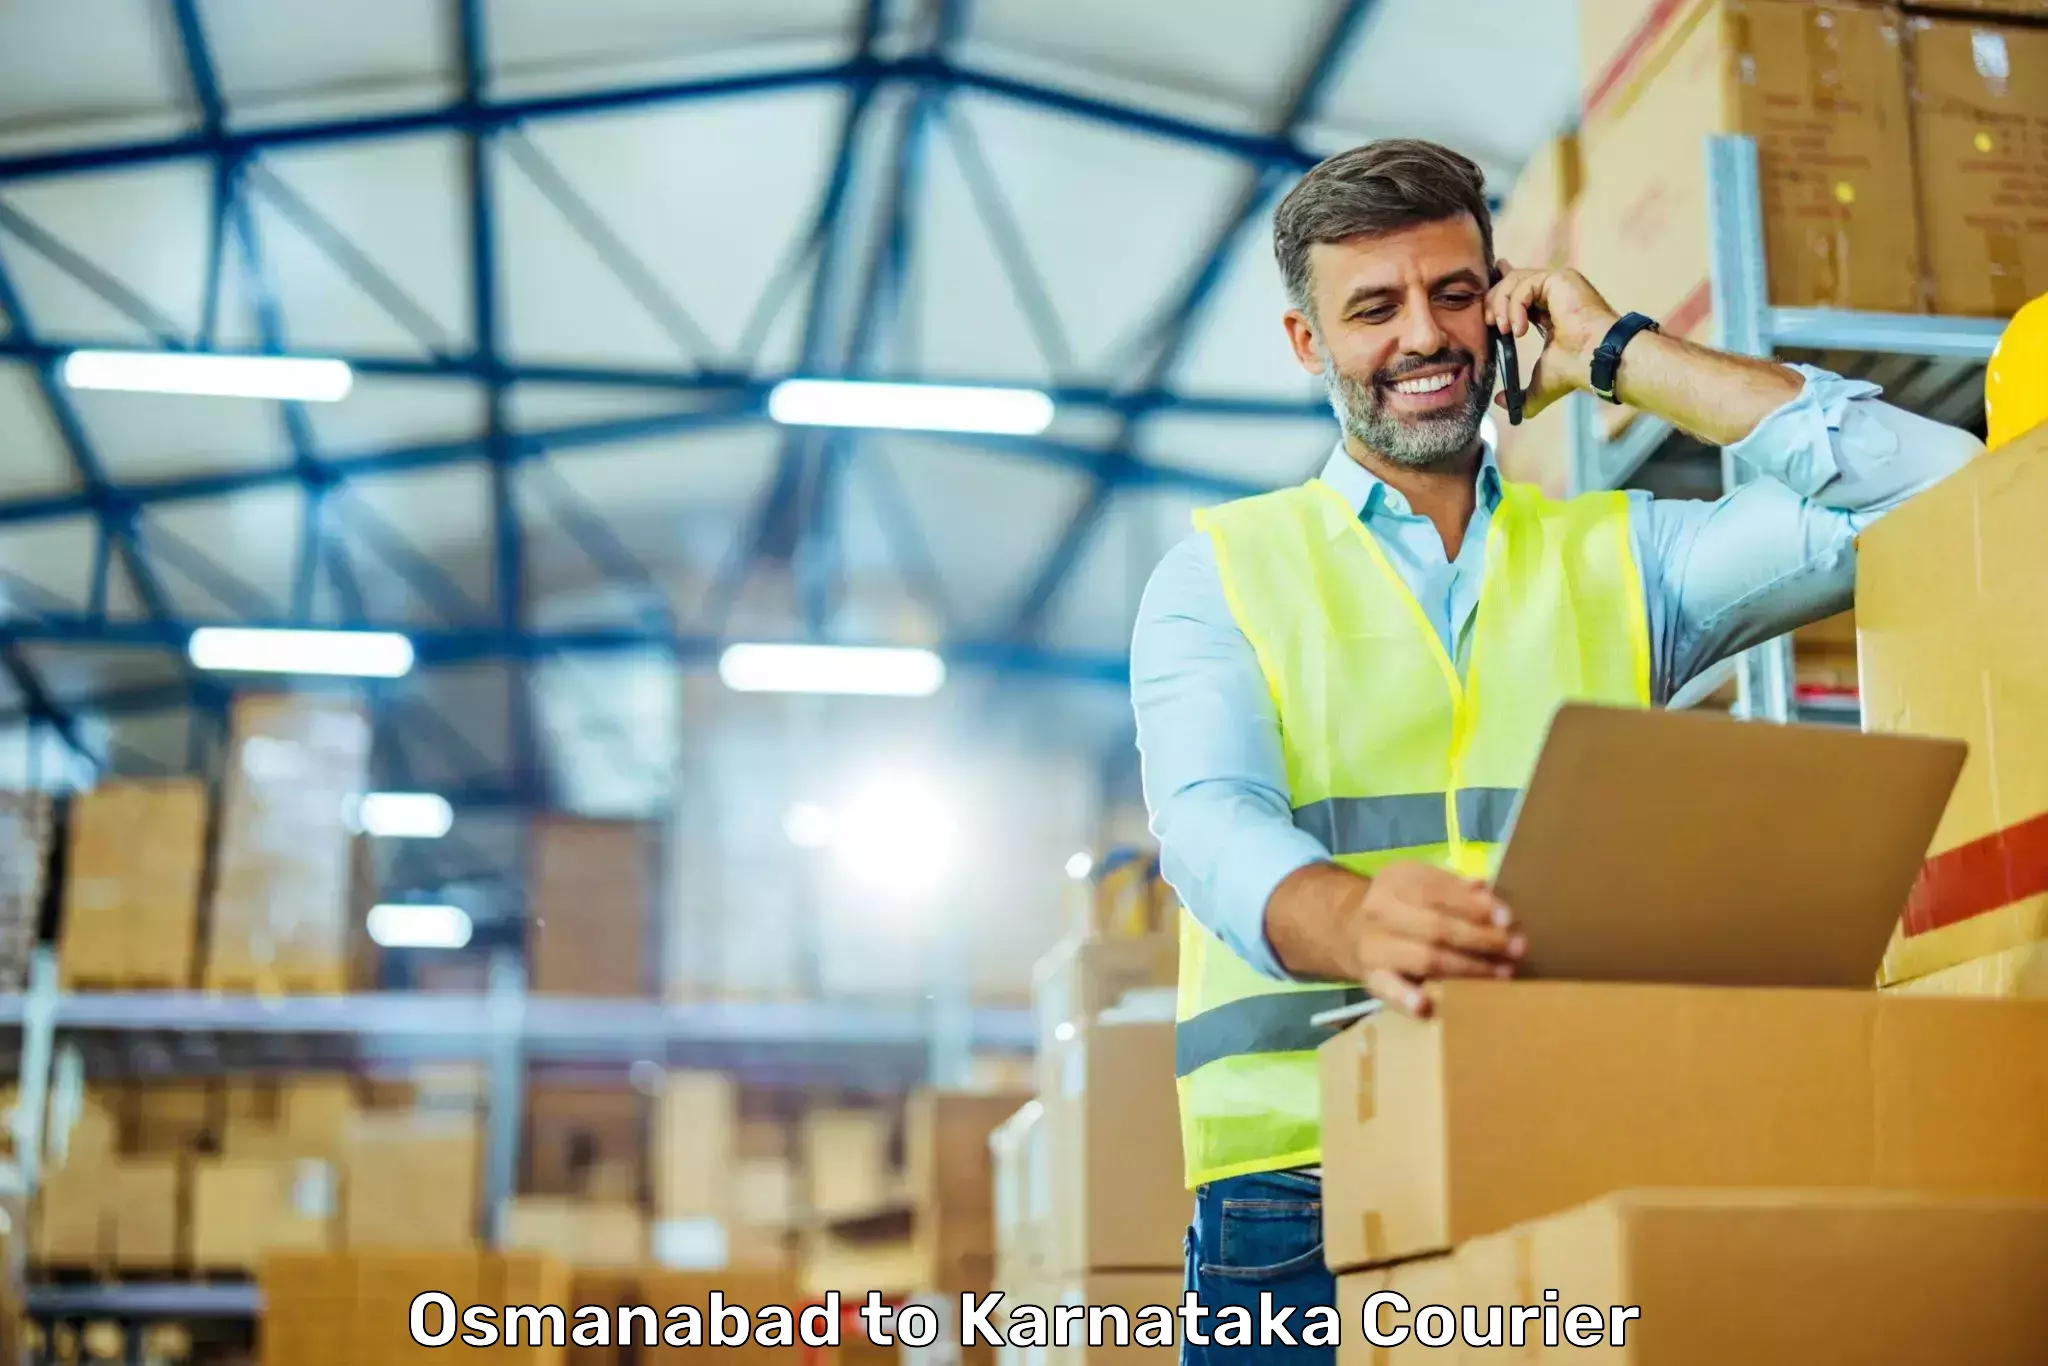 Professional parcel services in Osmanabad to Bailhongal